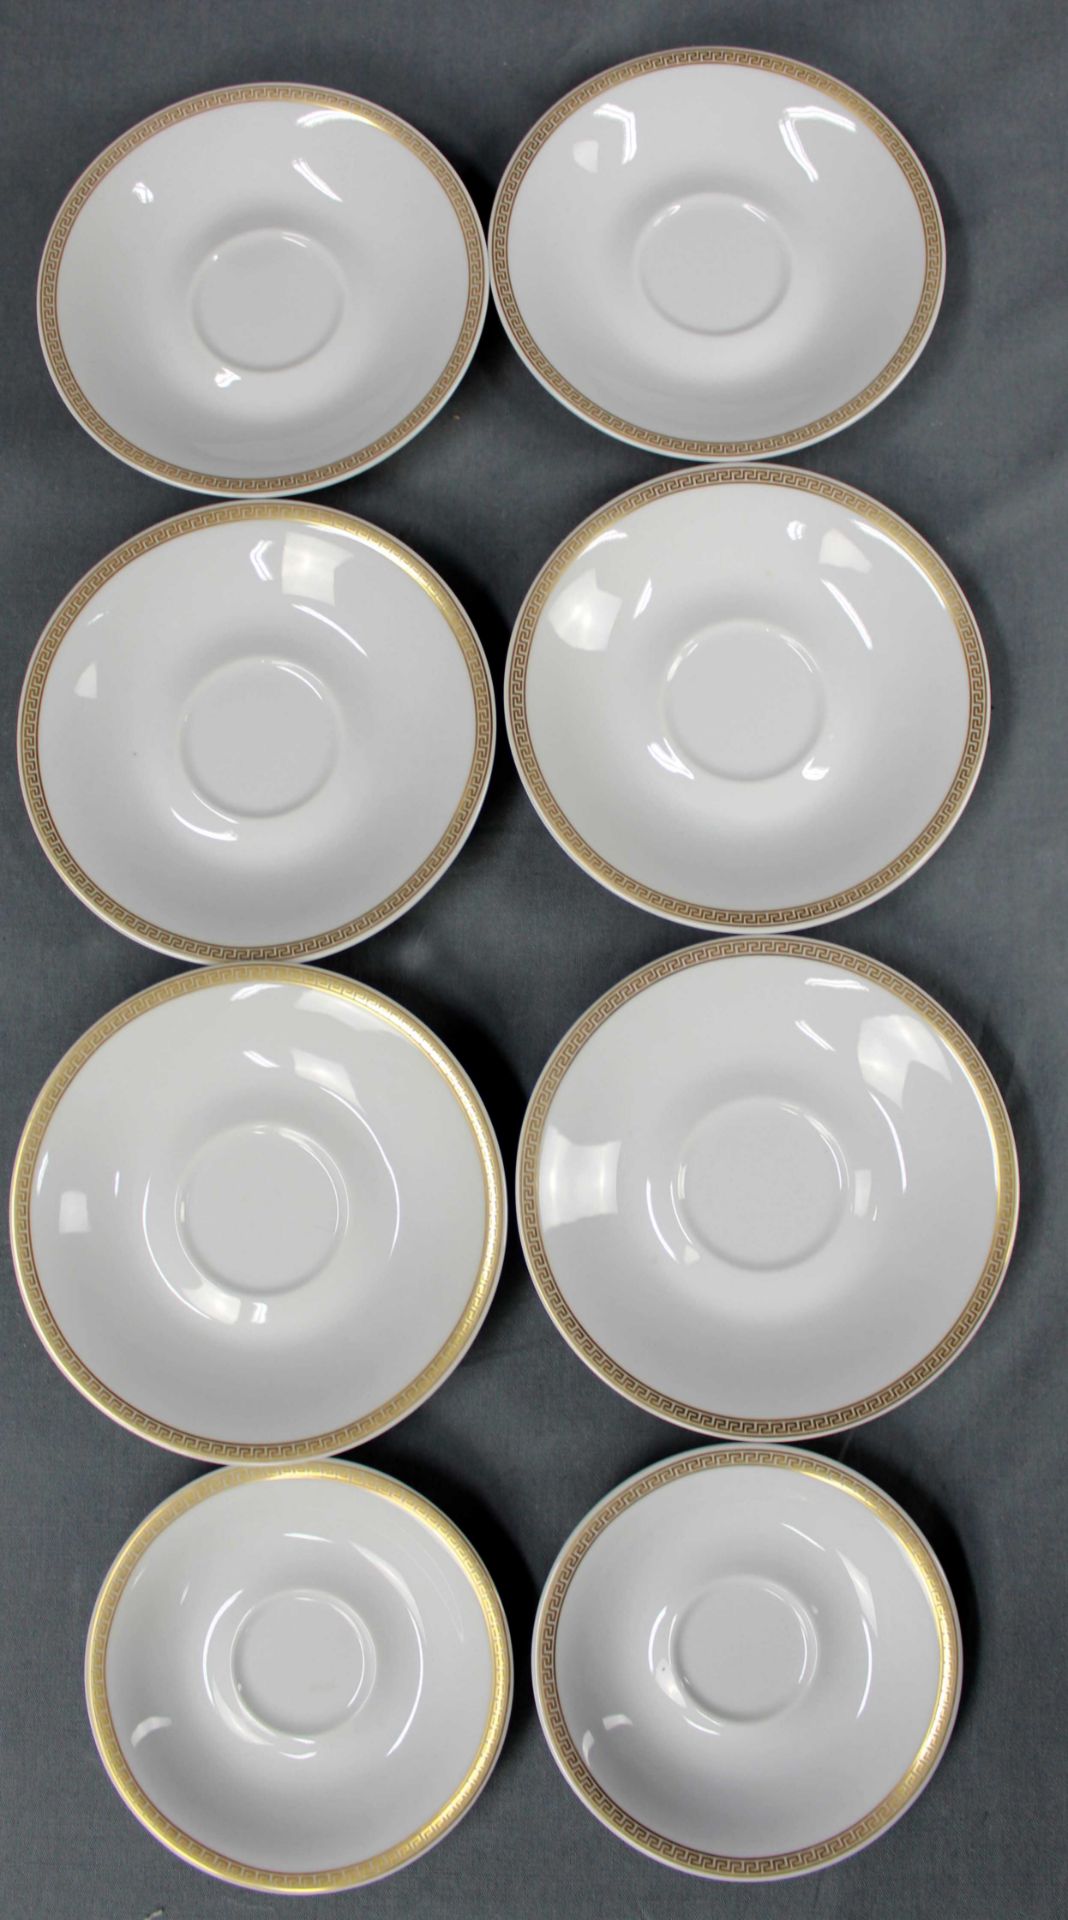 Rosenthal Versace porcelain. Dining service and coffee service for 6 people. - Image 3 of 27